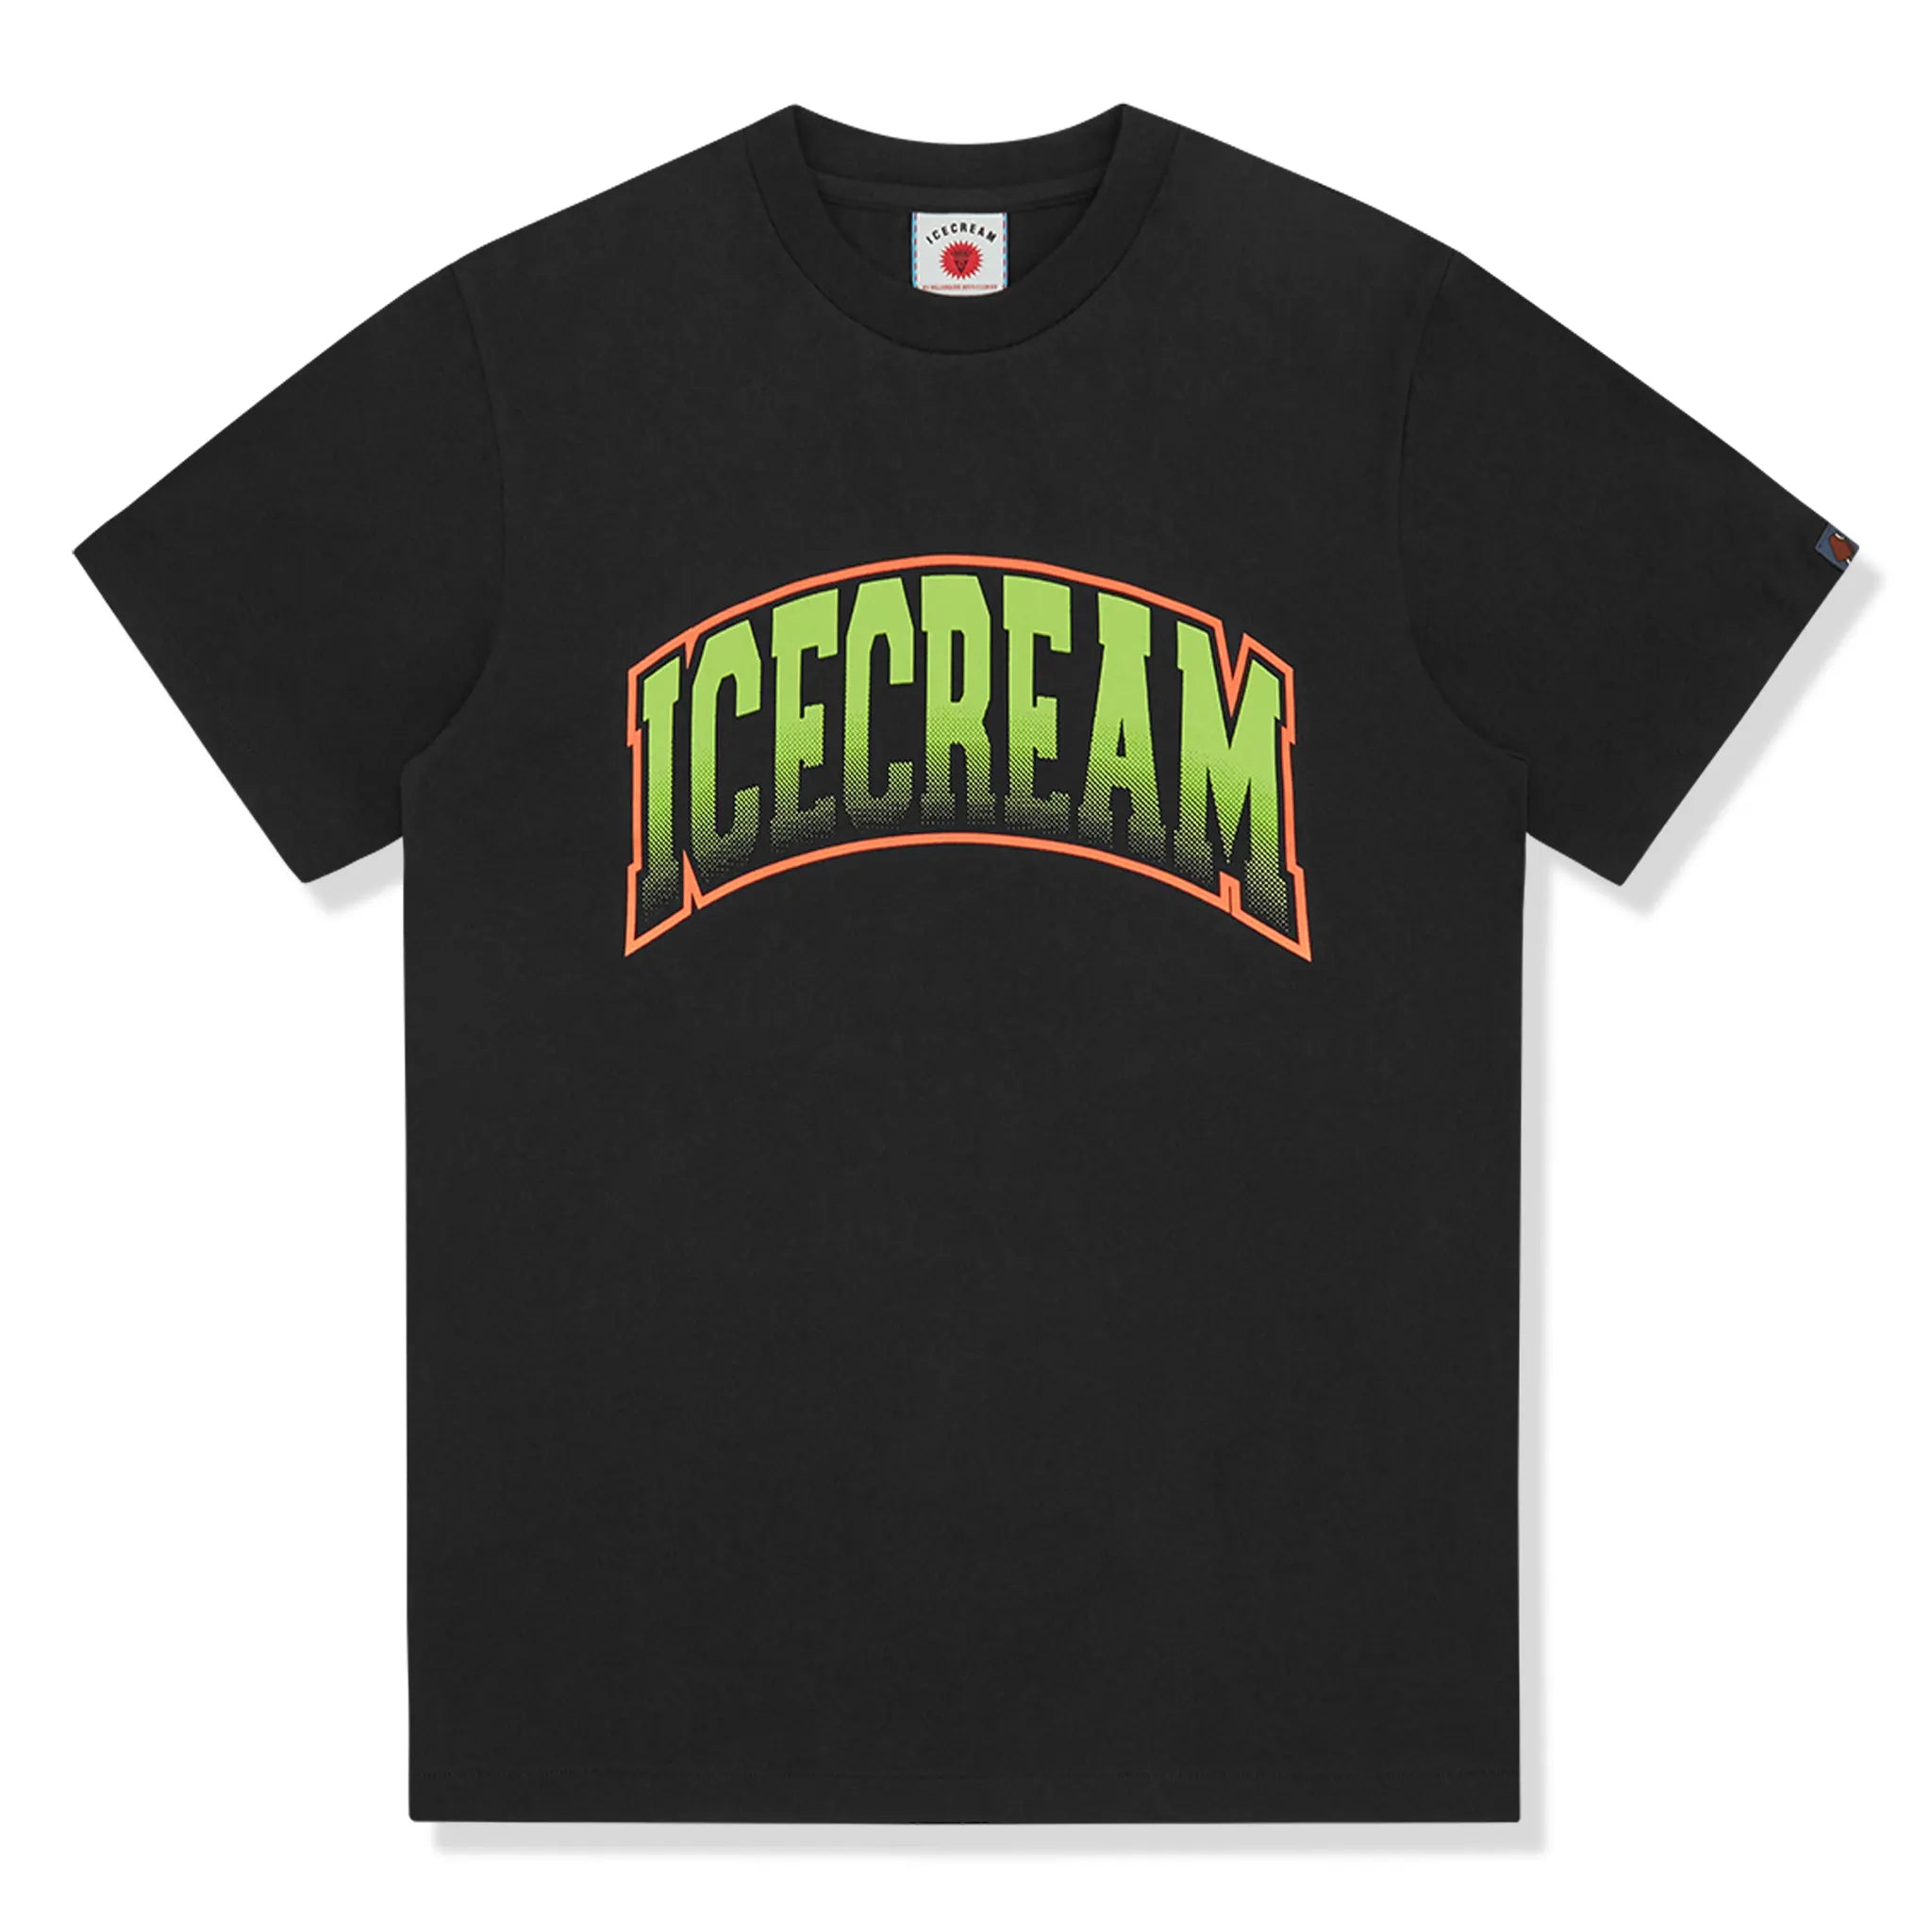 Front view of Icecream IC College Black T Shirt ic23436-blk